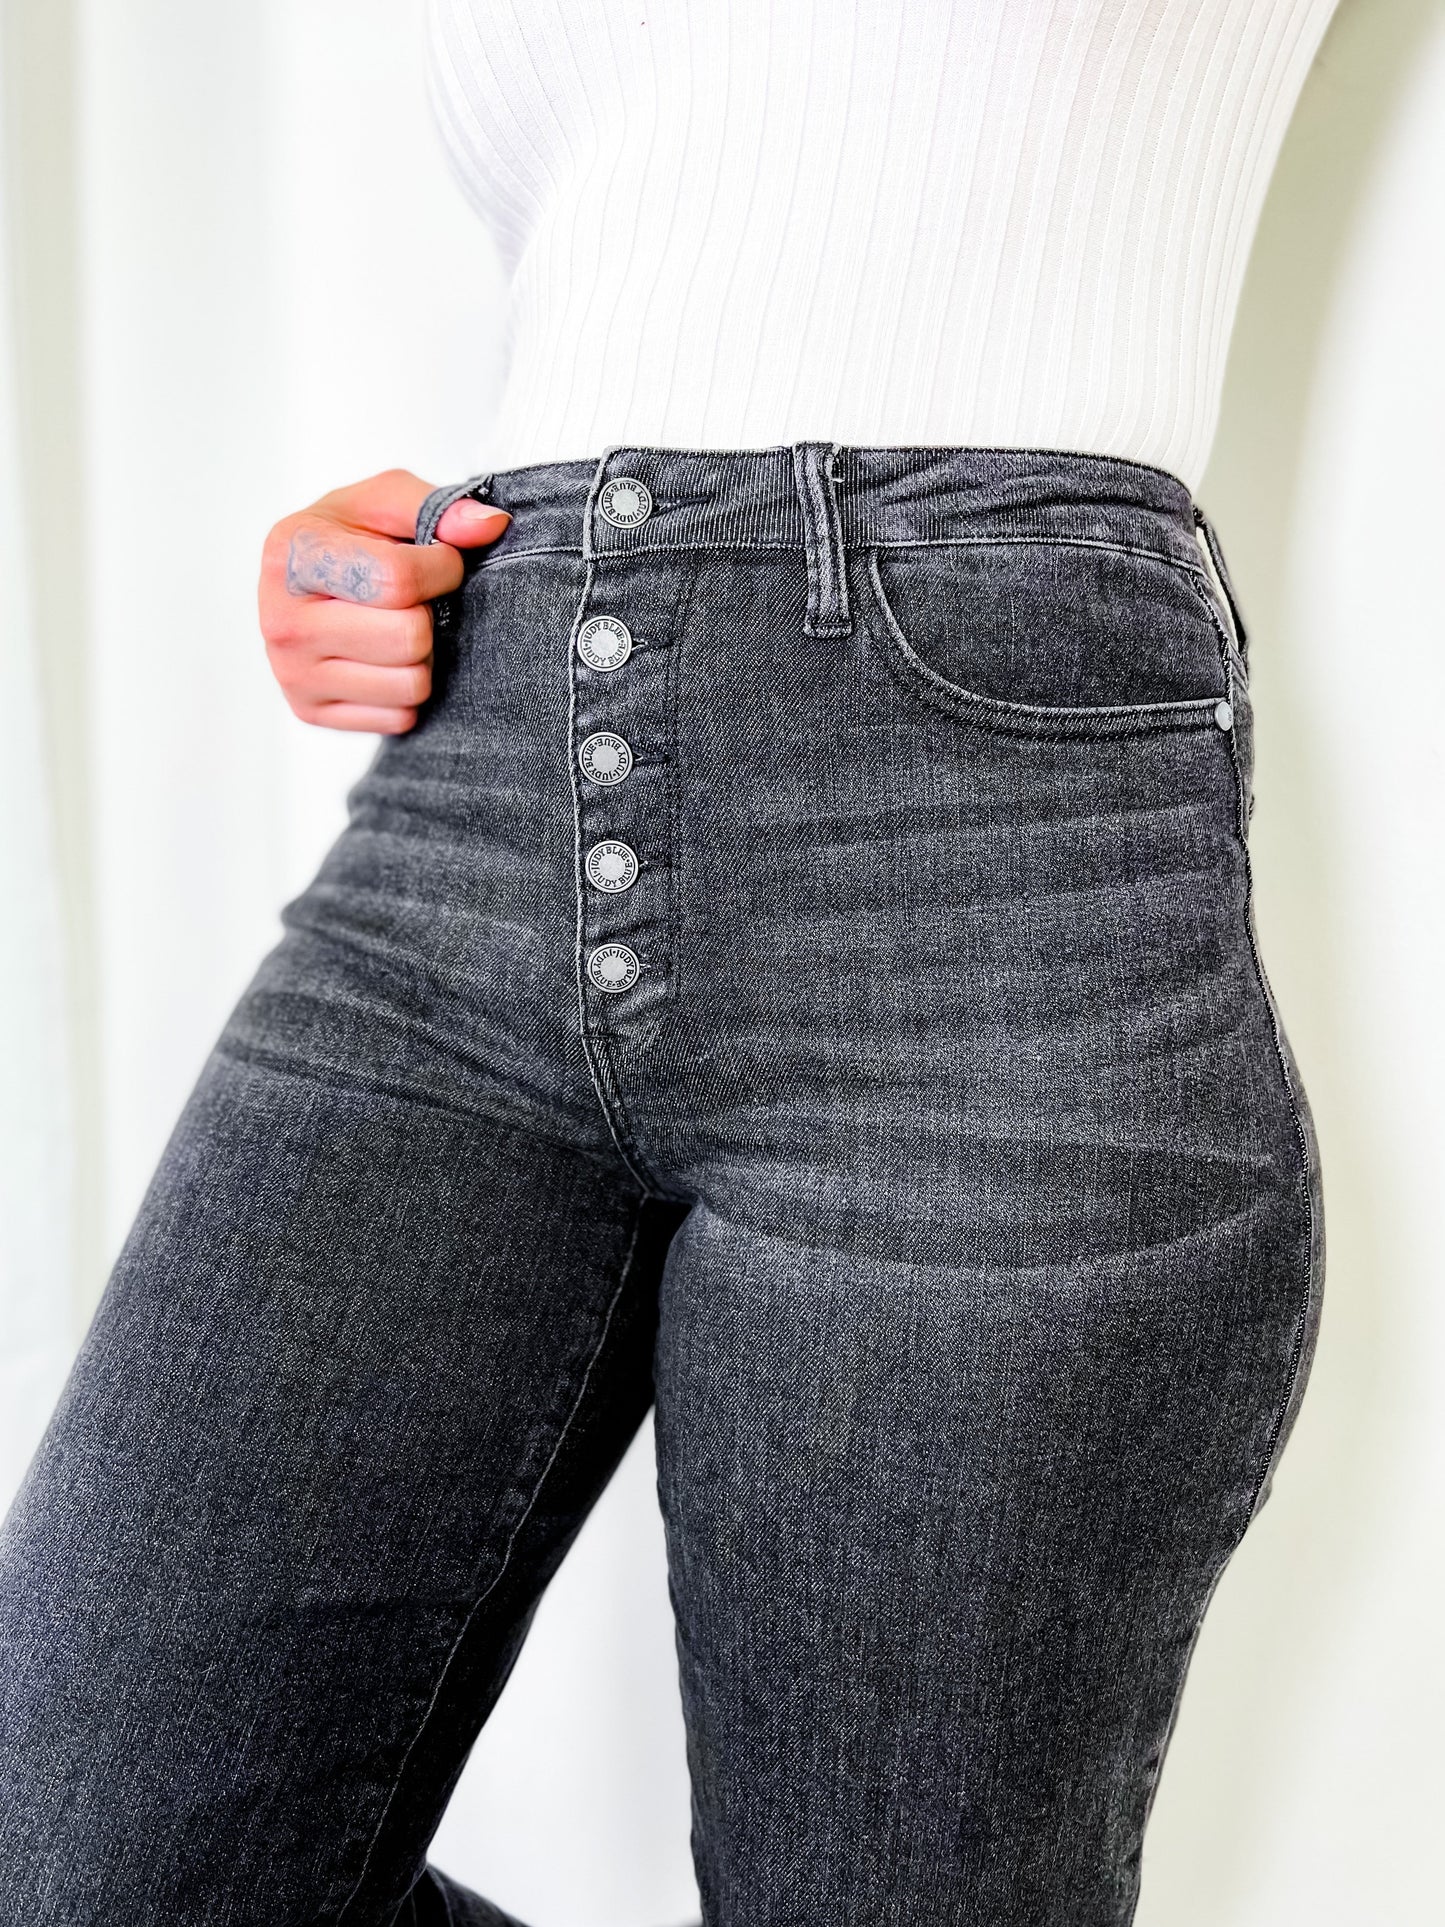 Judy Blue 50 Shades of Grey Button Fly Wide Leg Black Jeans